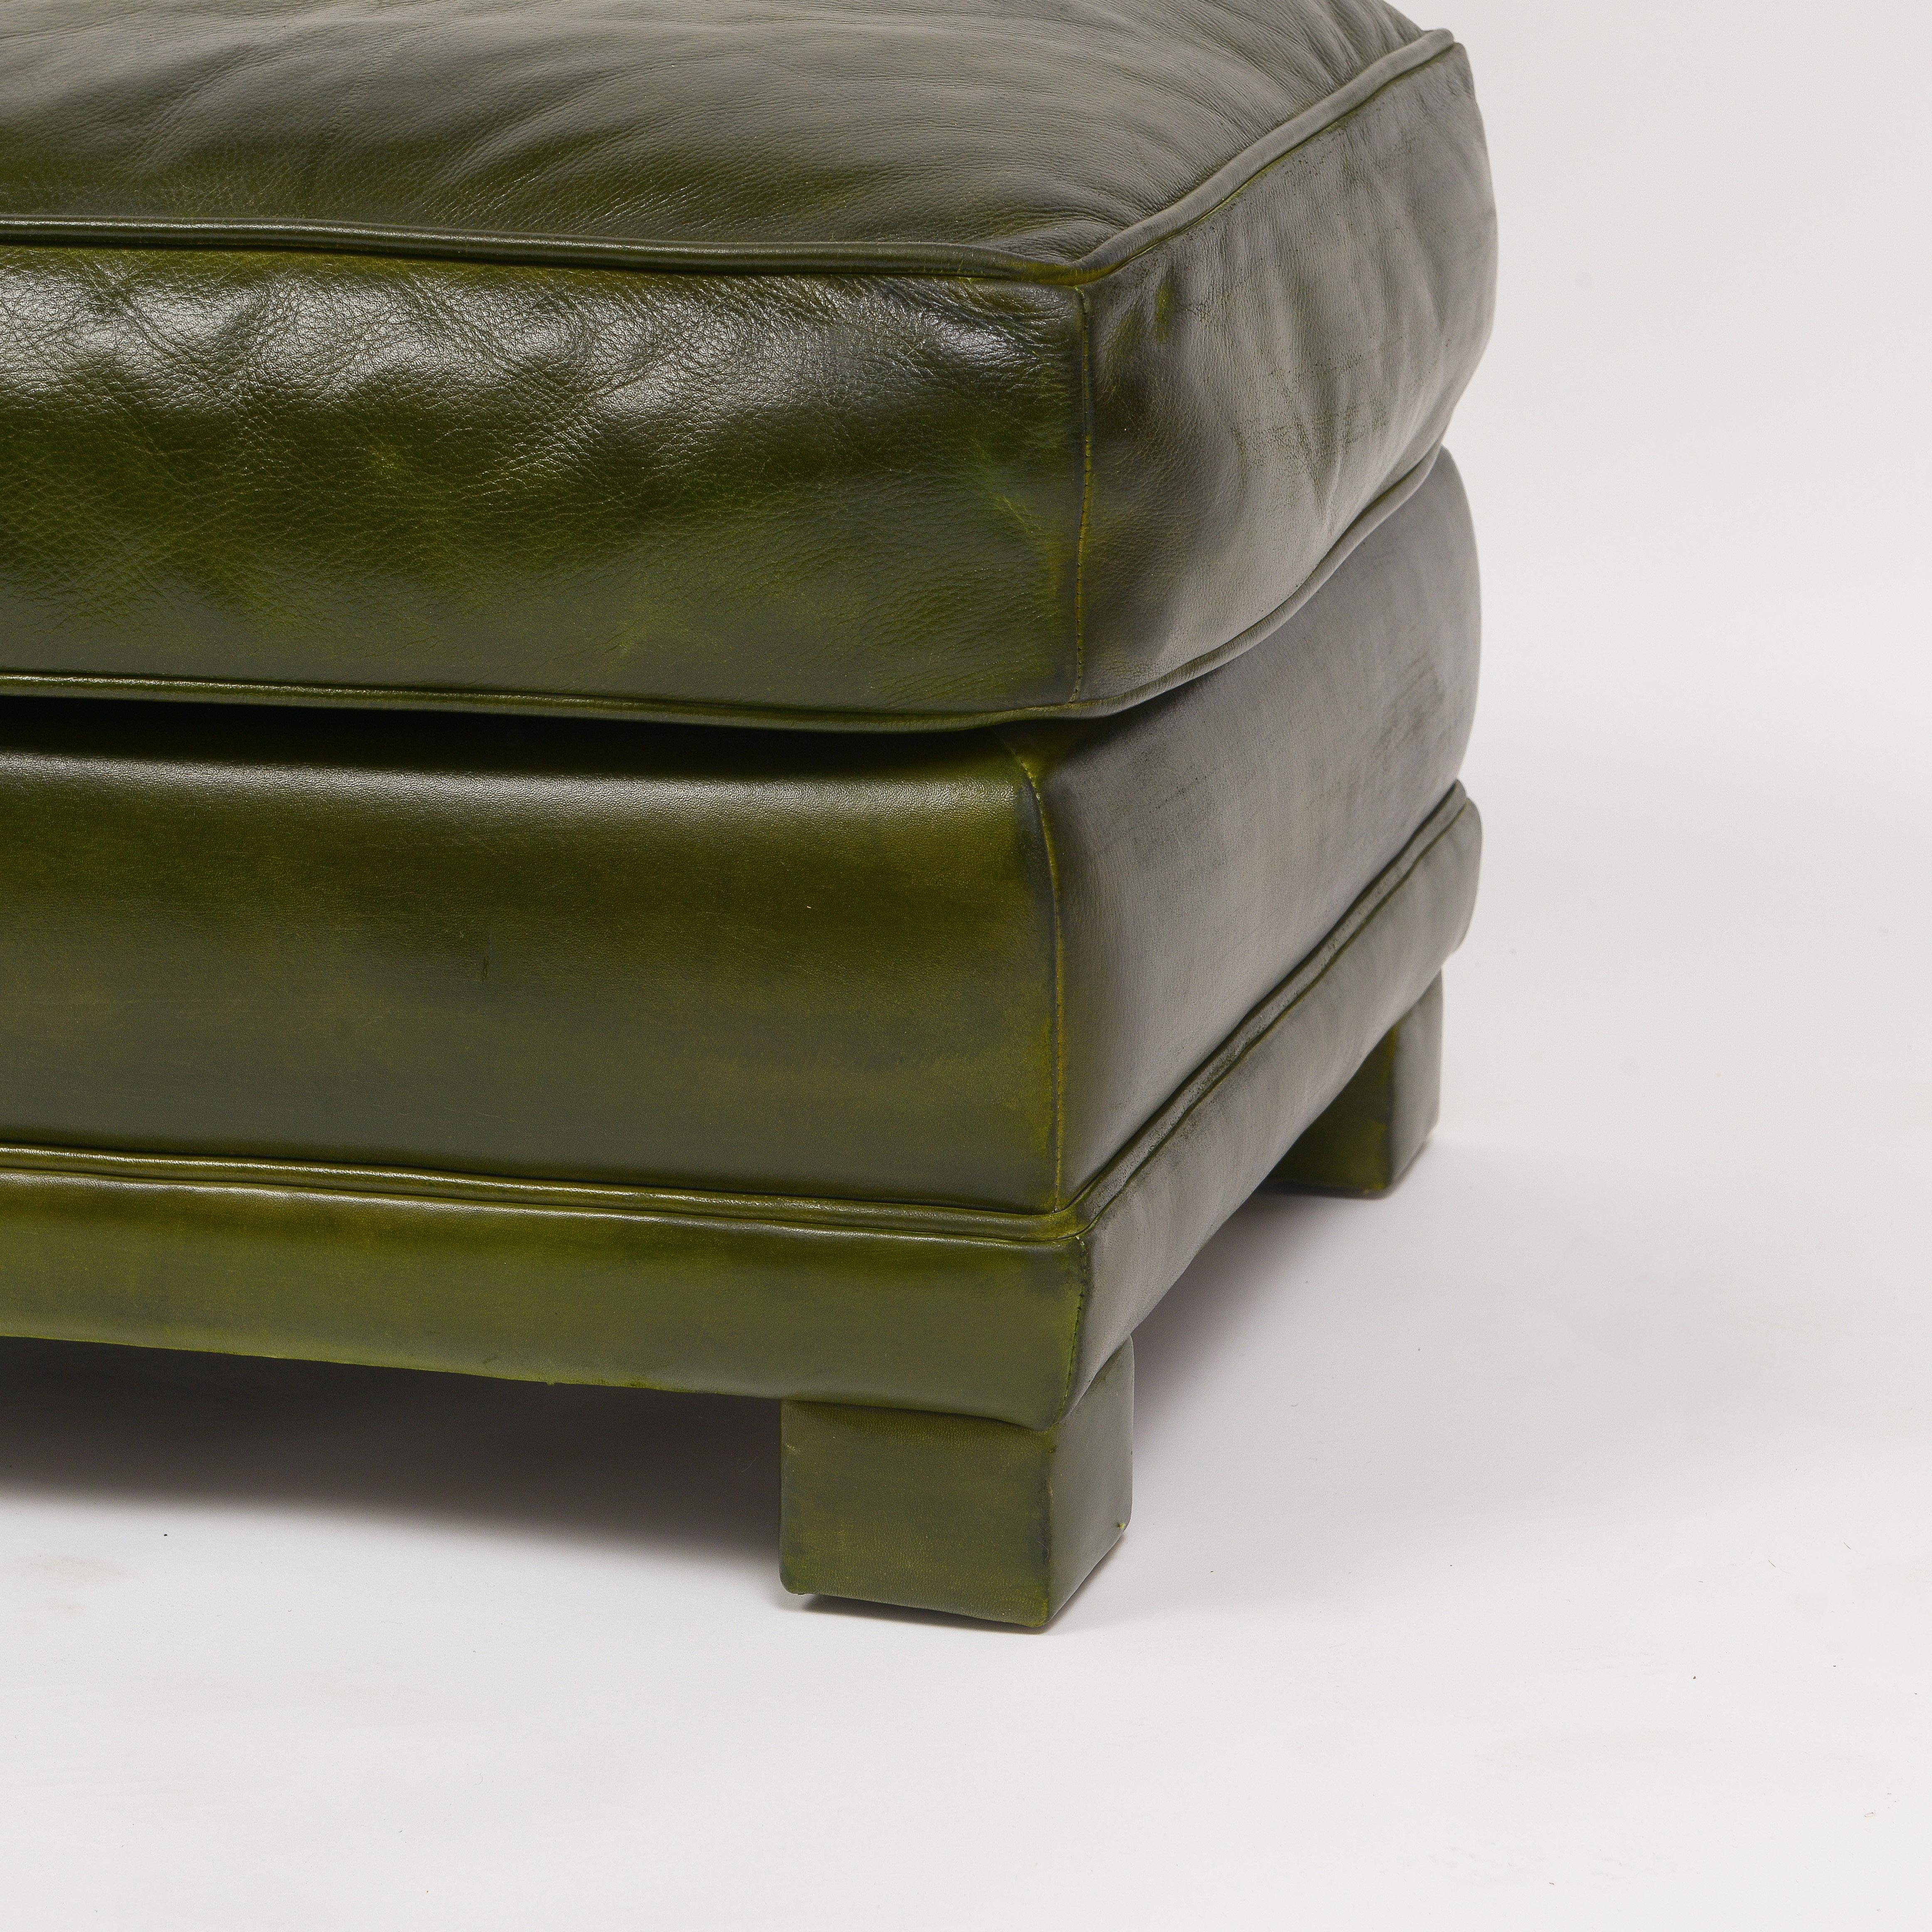 Early 21st Century Green Leather Club Chairs With Ottomans- 4 Pieces For Sale 5